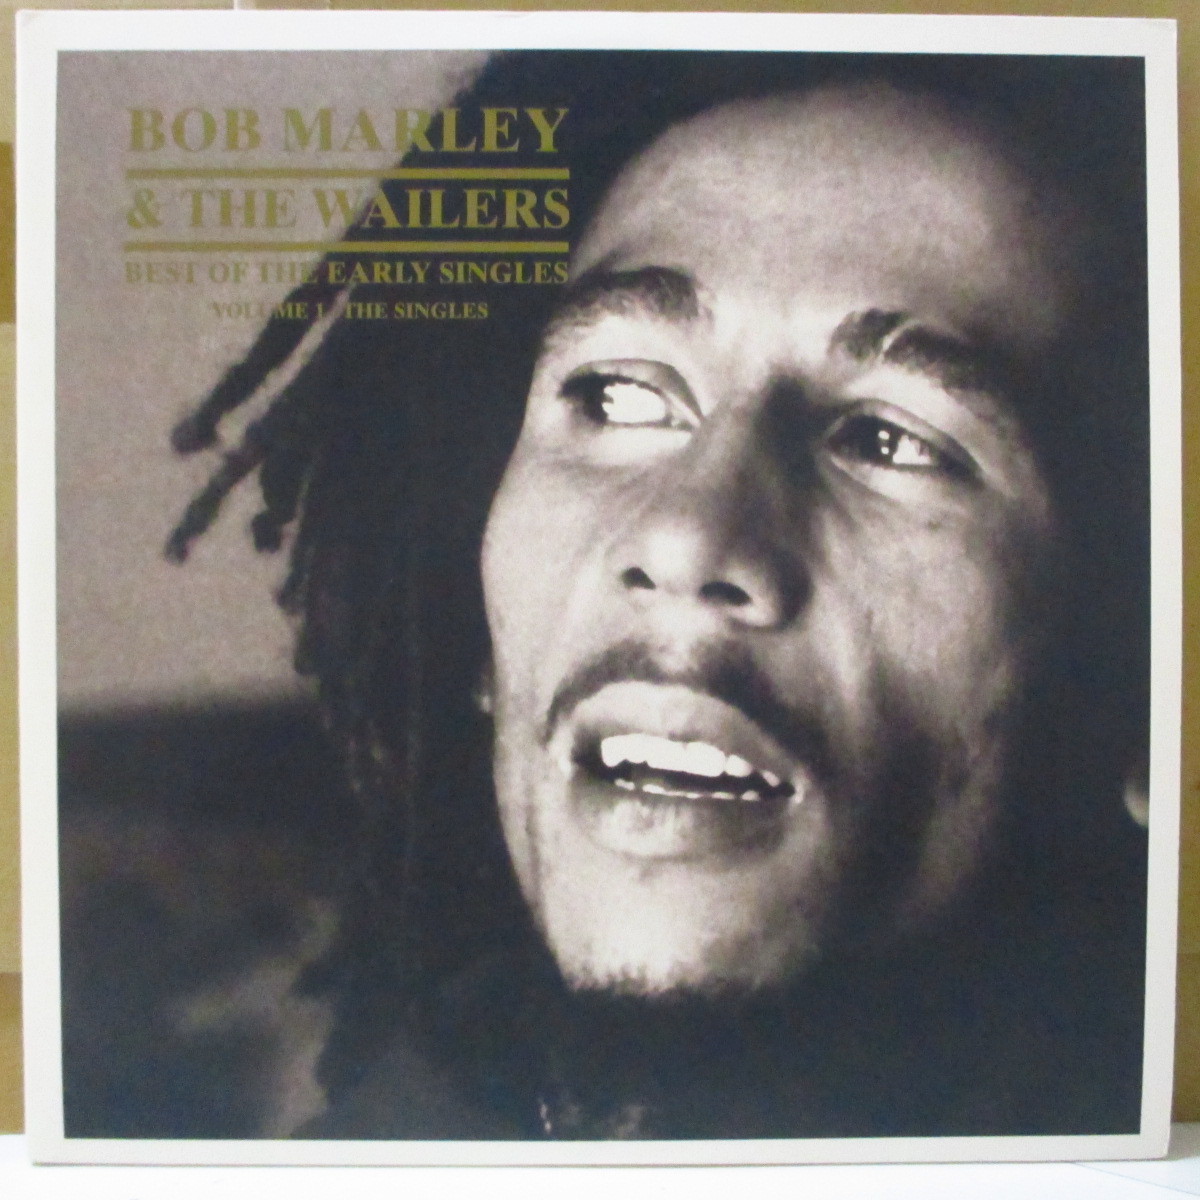 BOB MARLEY & THE WAILERS-Best Of The Early Singles Volume 1_画像1